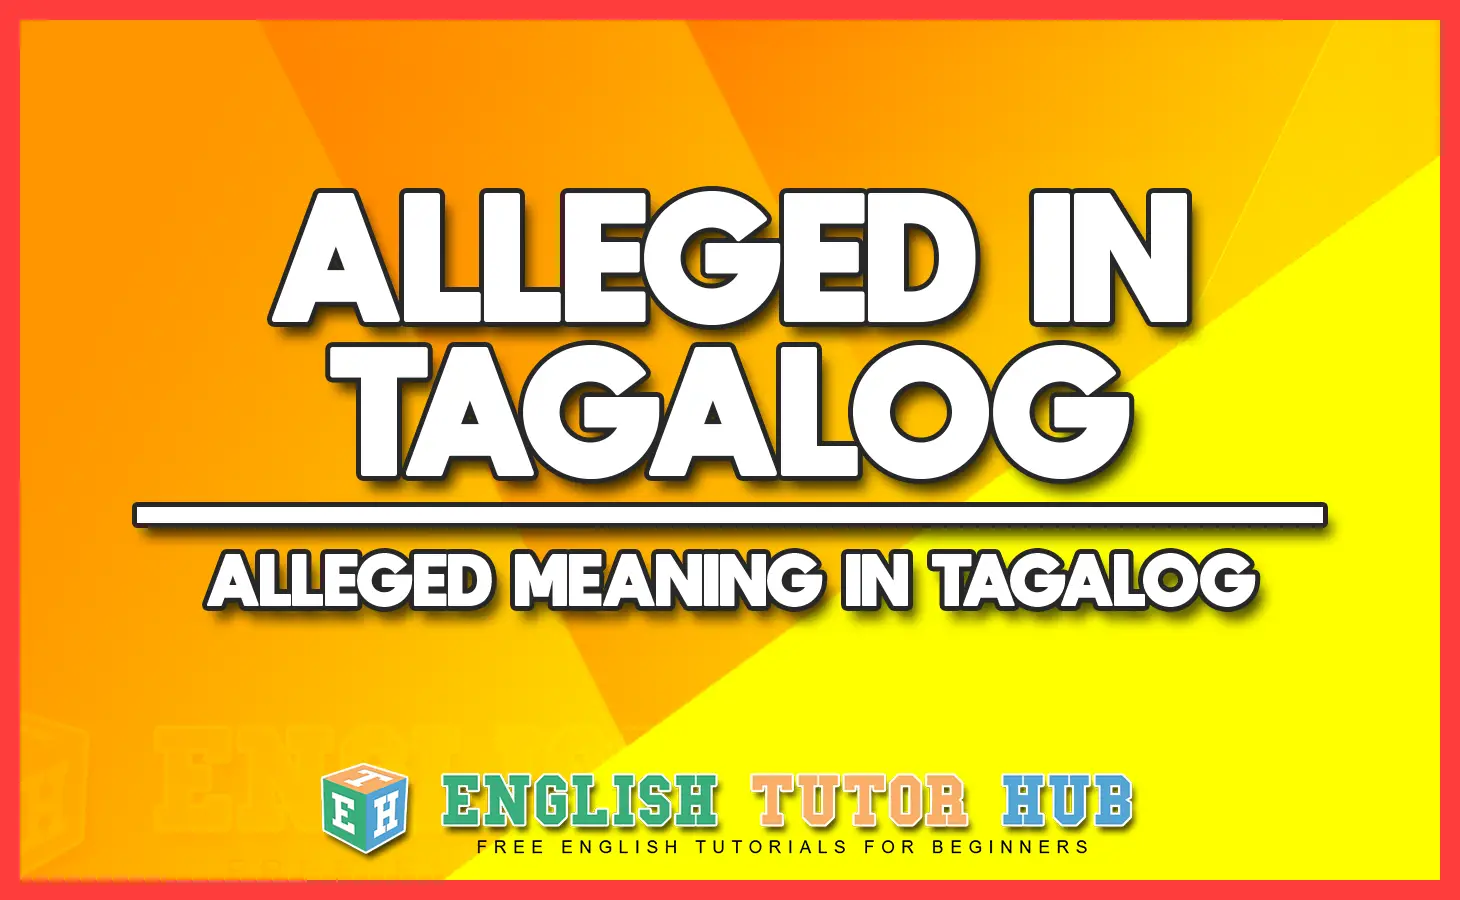 ALLEGED IN TAGALOG - ALLEGED MEANING IN TAGALOG